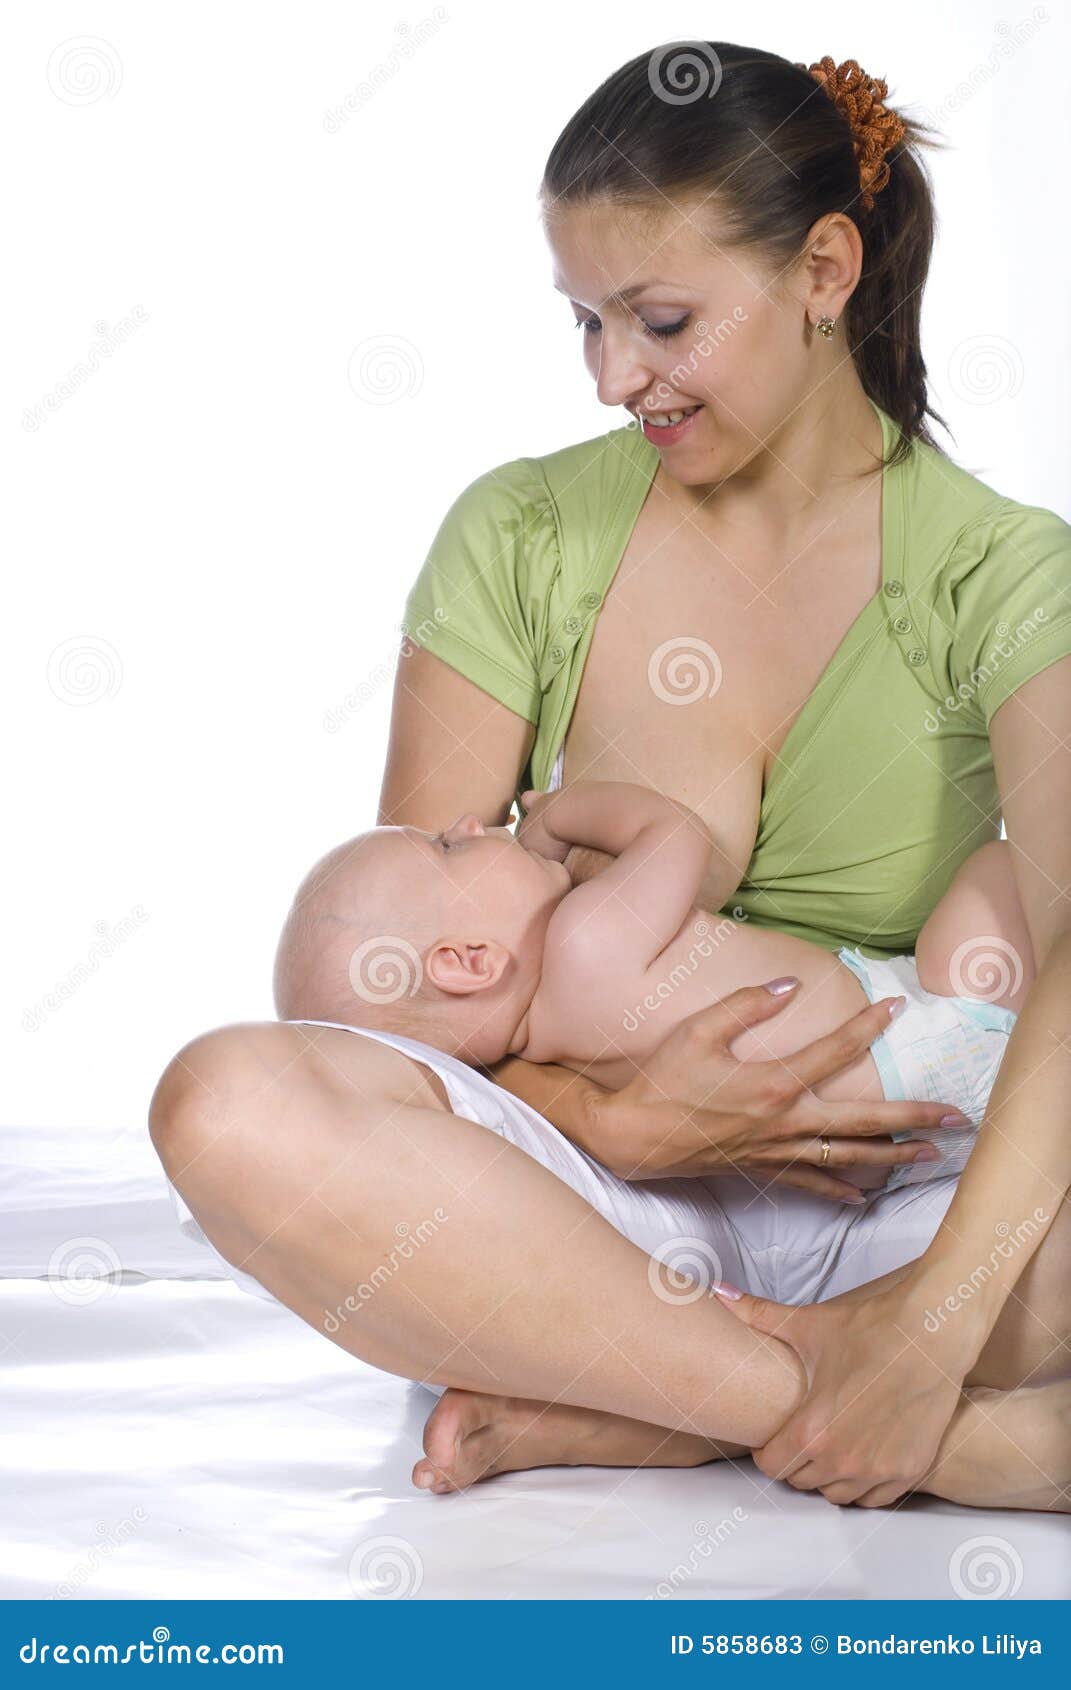 The woman feeding a baby stock image. Image of breast - 5858683